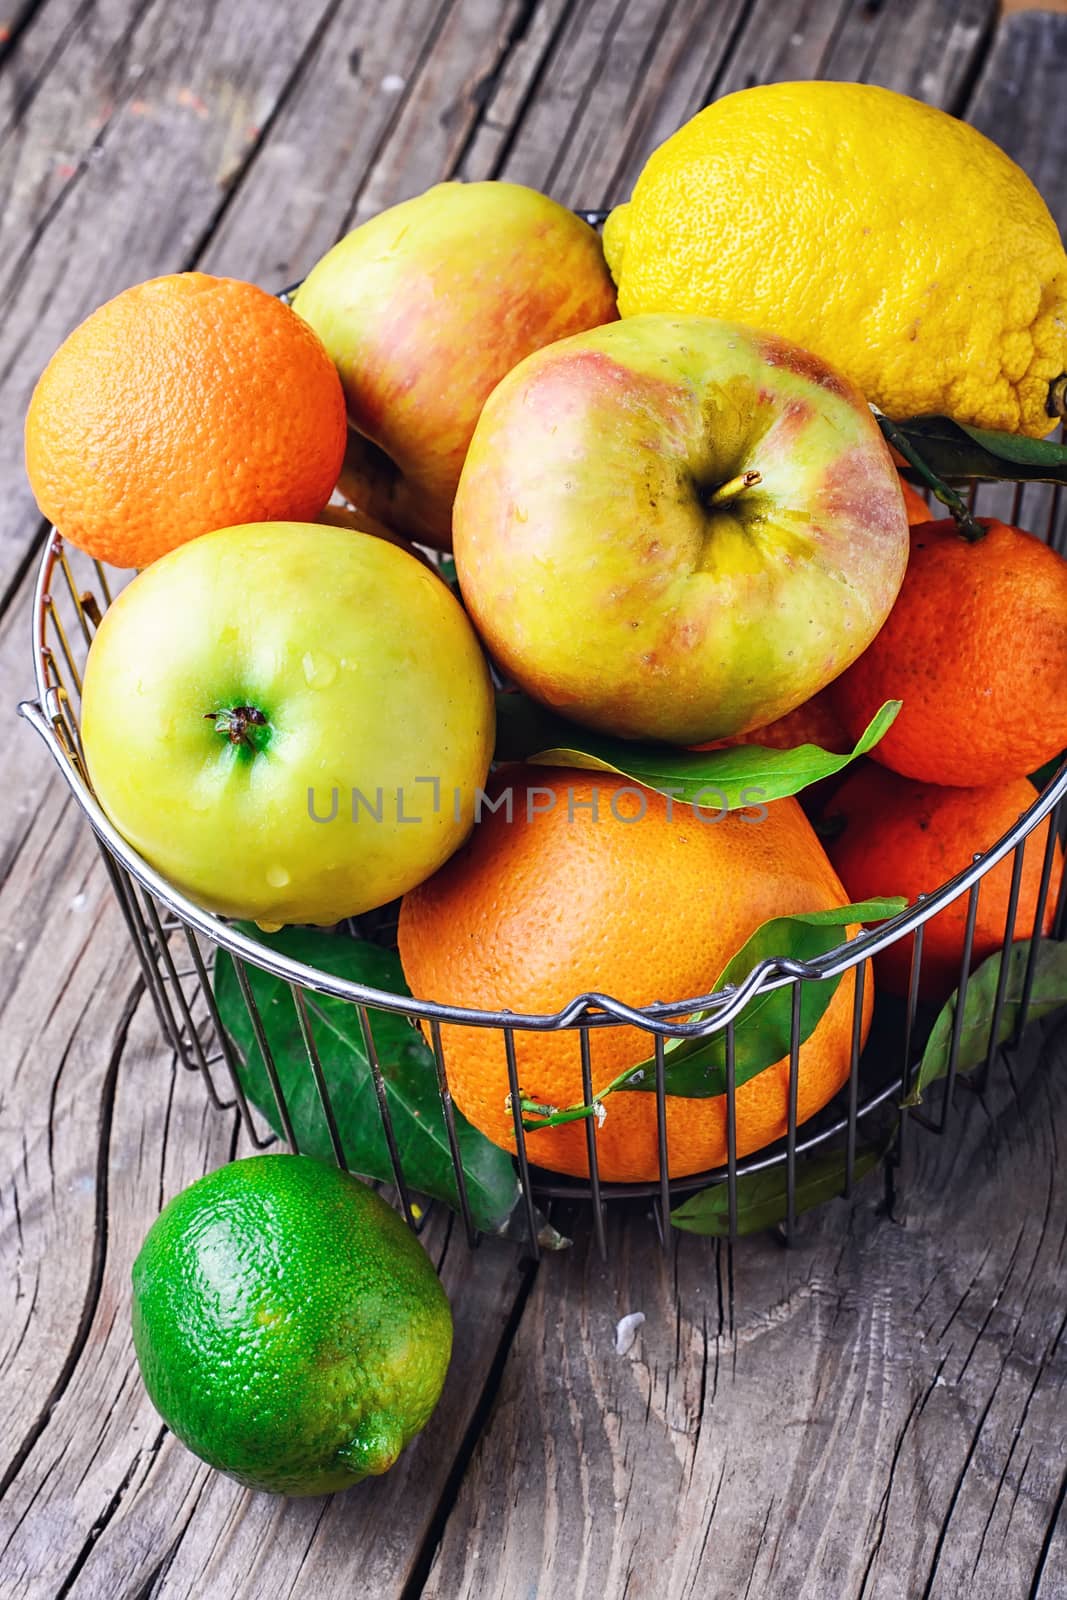 Metal fruit basket with apples and citrus fruits on the wooden table